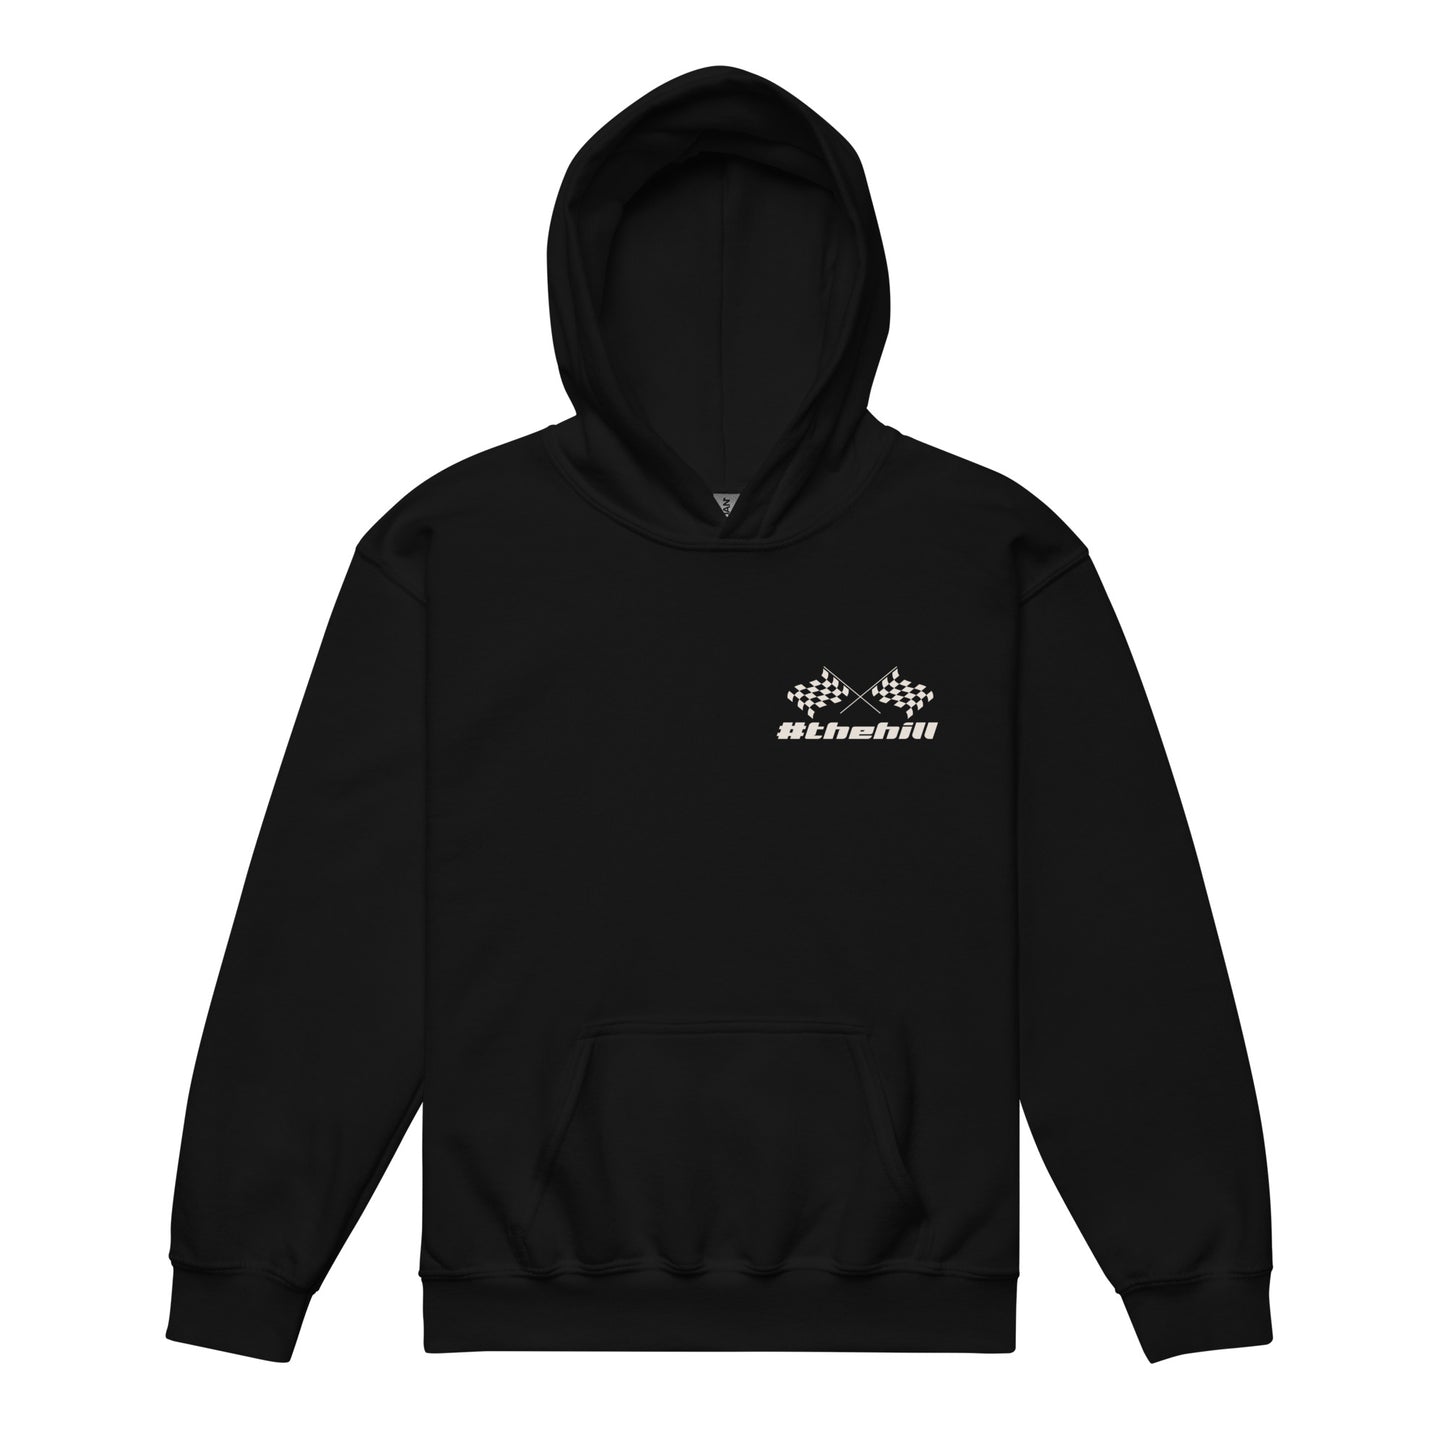 Oakhill Raceway "The Hill" YOUTH Hoodie